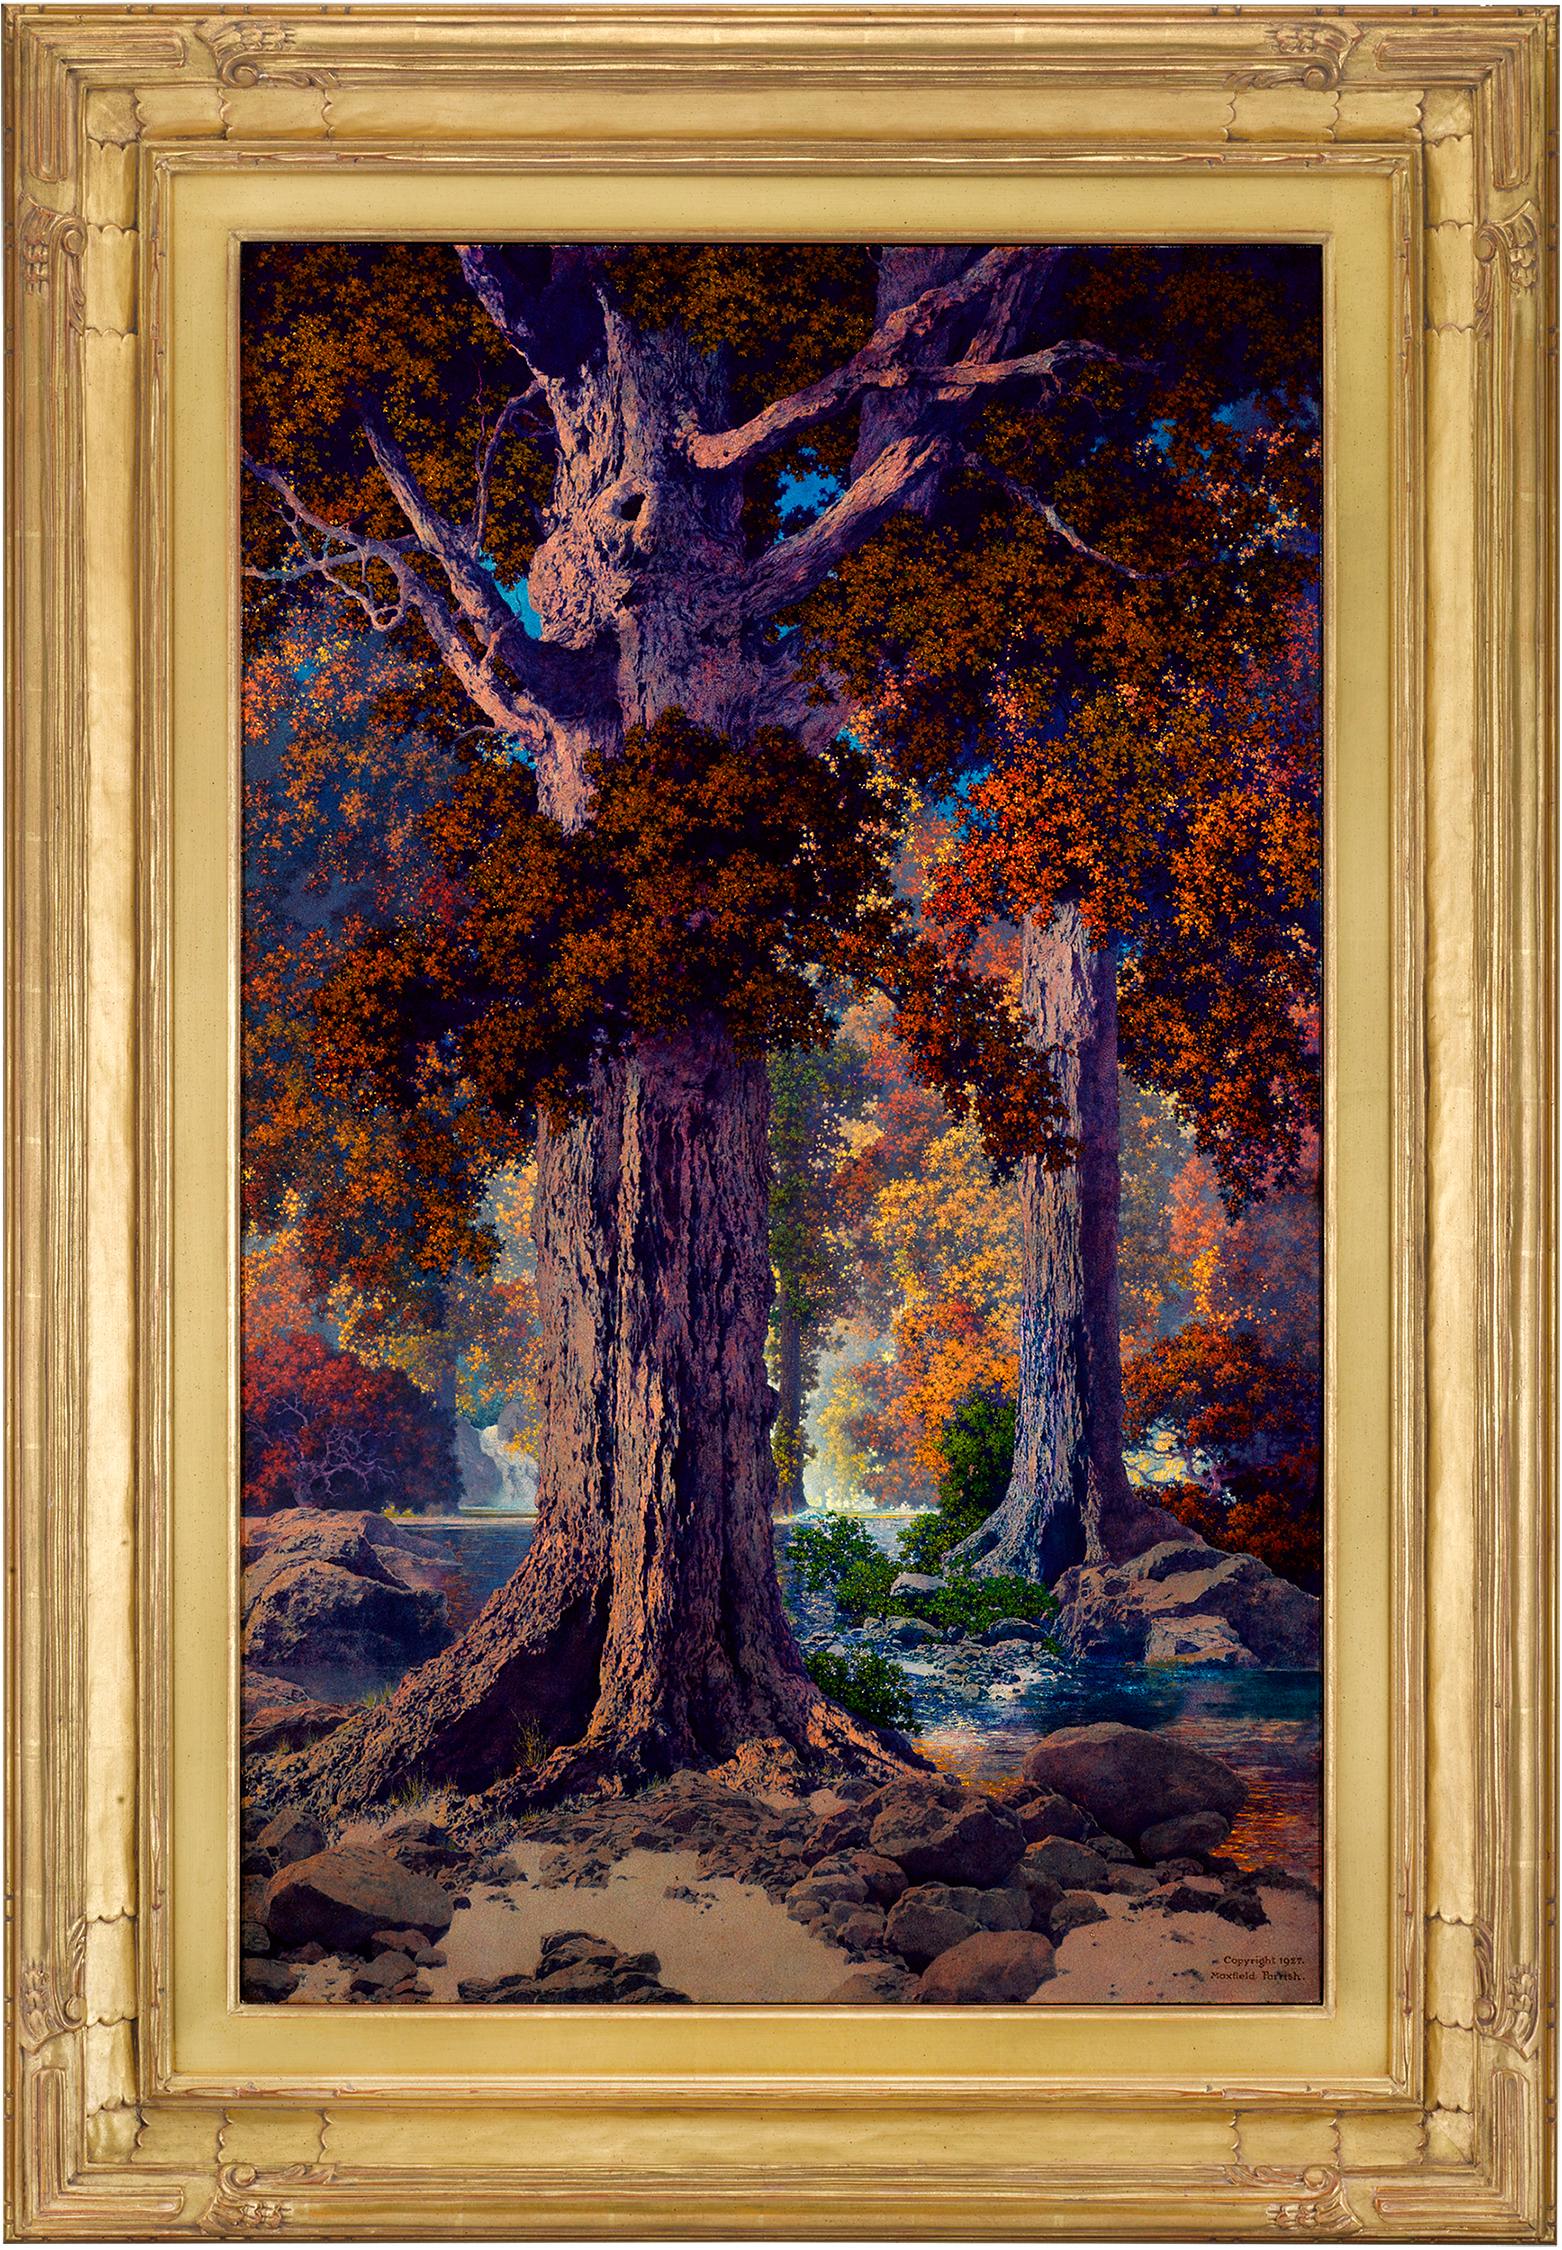 Autumn Woods - Painting by Maxfield Parrish